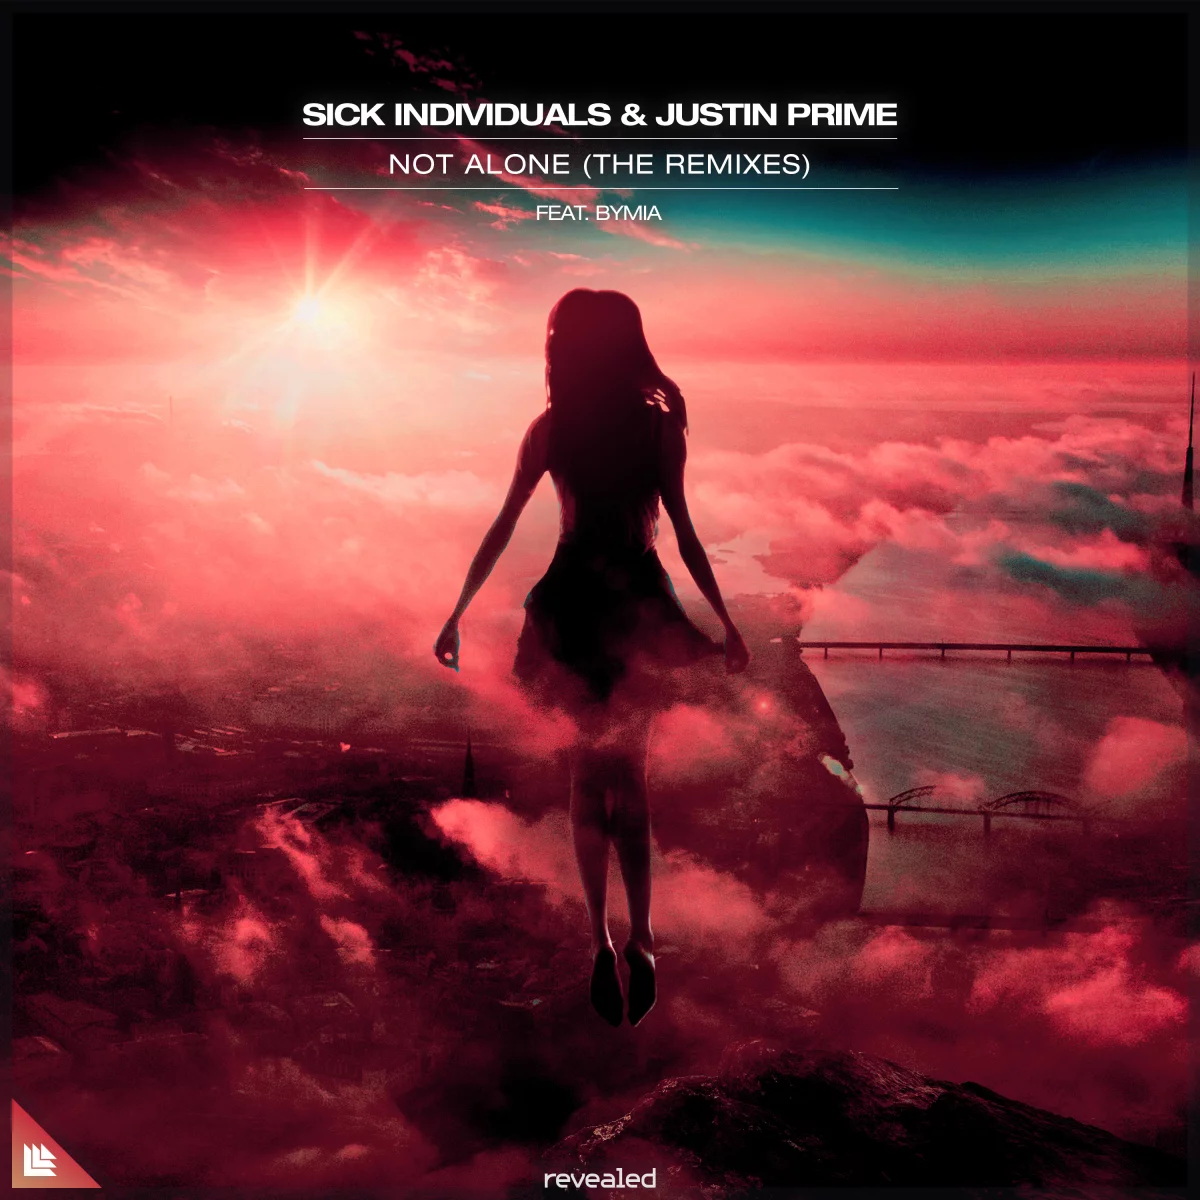 Not Alone (The Remixes) - Sick Individuals⁠ & Justin Prime⁠ feat. Bymia 